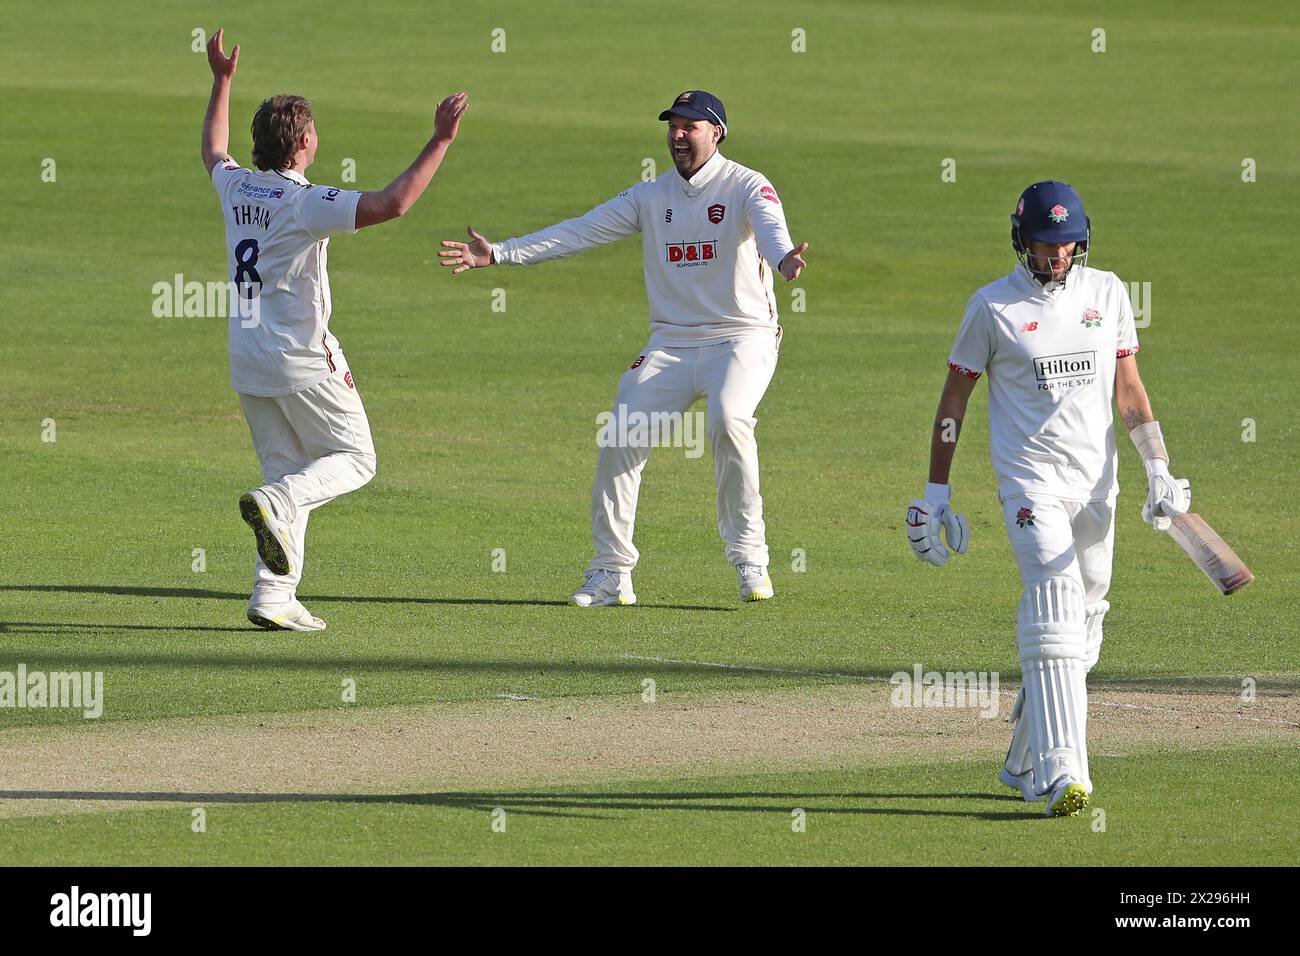 Noah Thain of Essex celebrates with his team mates after taking the wicket of Tom Bailey during Essex CCC vs Lancashire CCC, Vitality County Champions Stock Photo